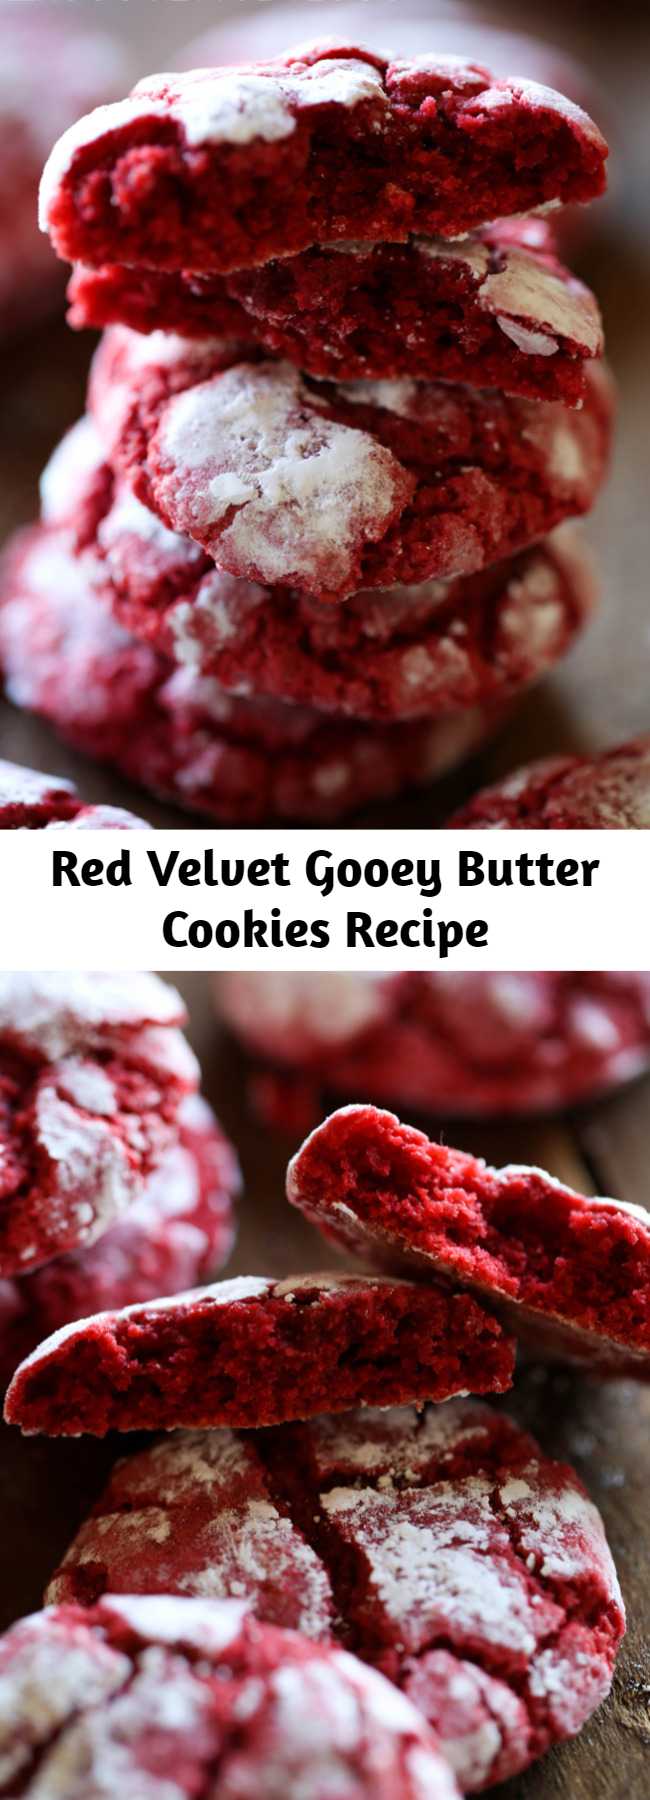 Red Velvet Gooey Butter Cookies Recipe - A moist and soft cookie that is perfect for the holidays! They really are DELICIOUS!